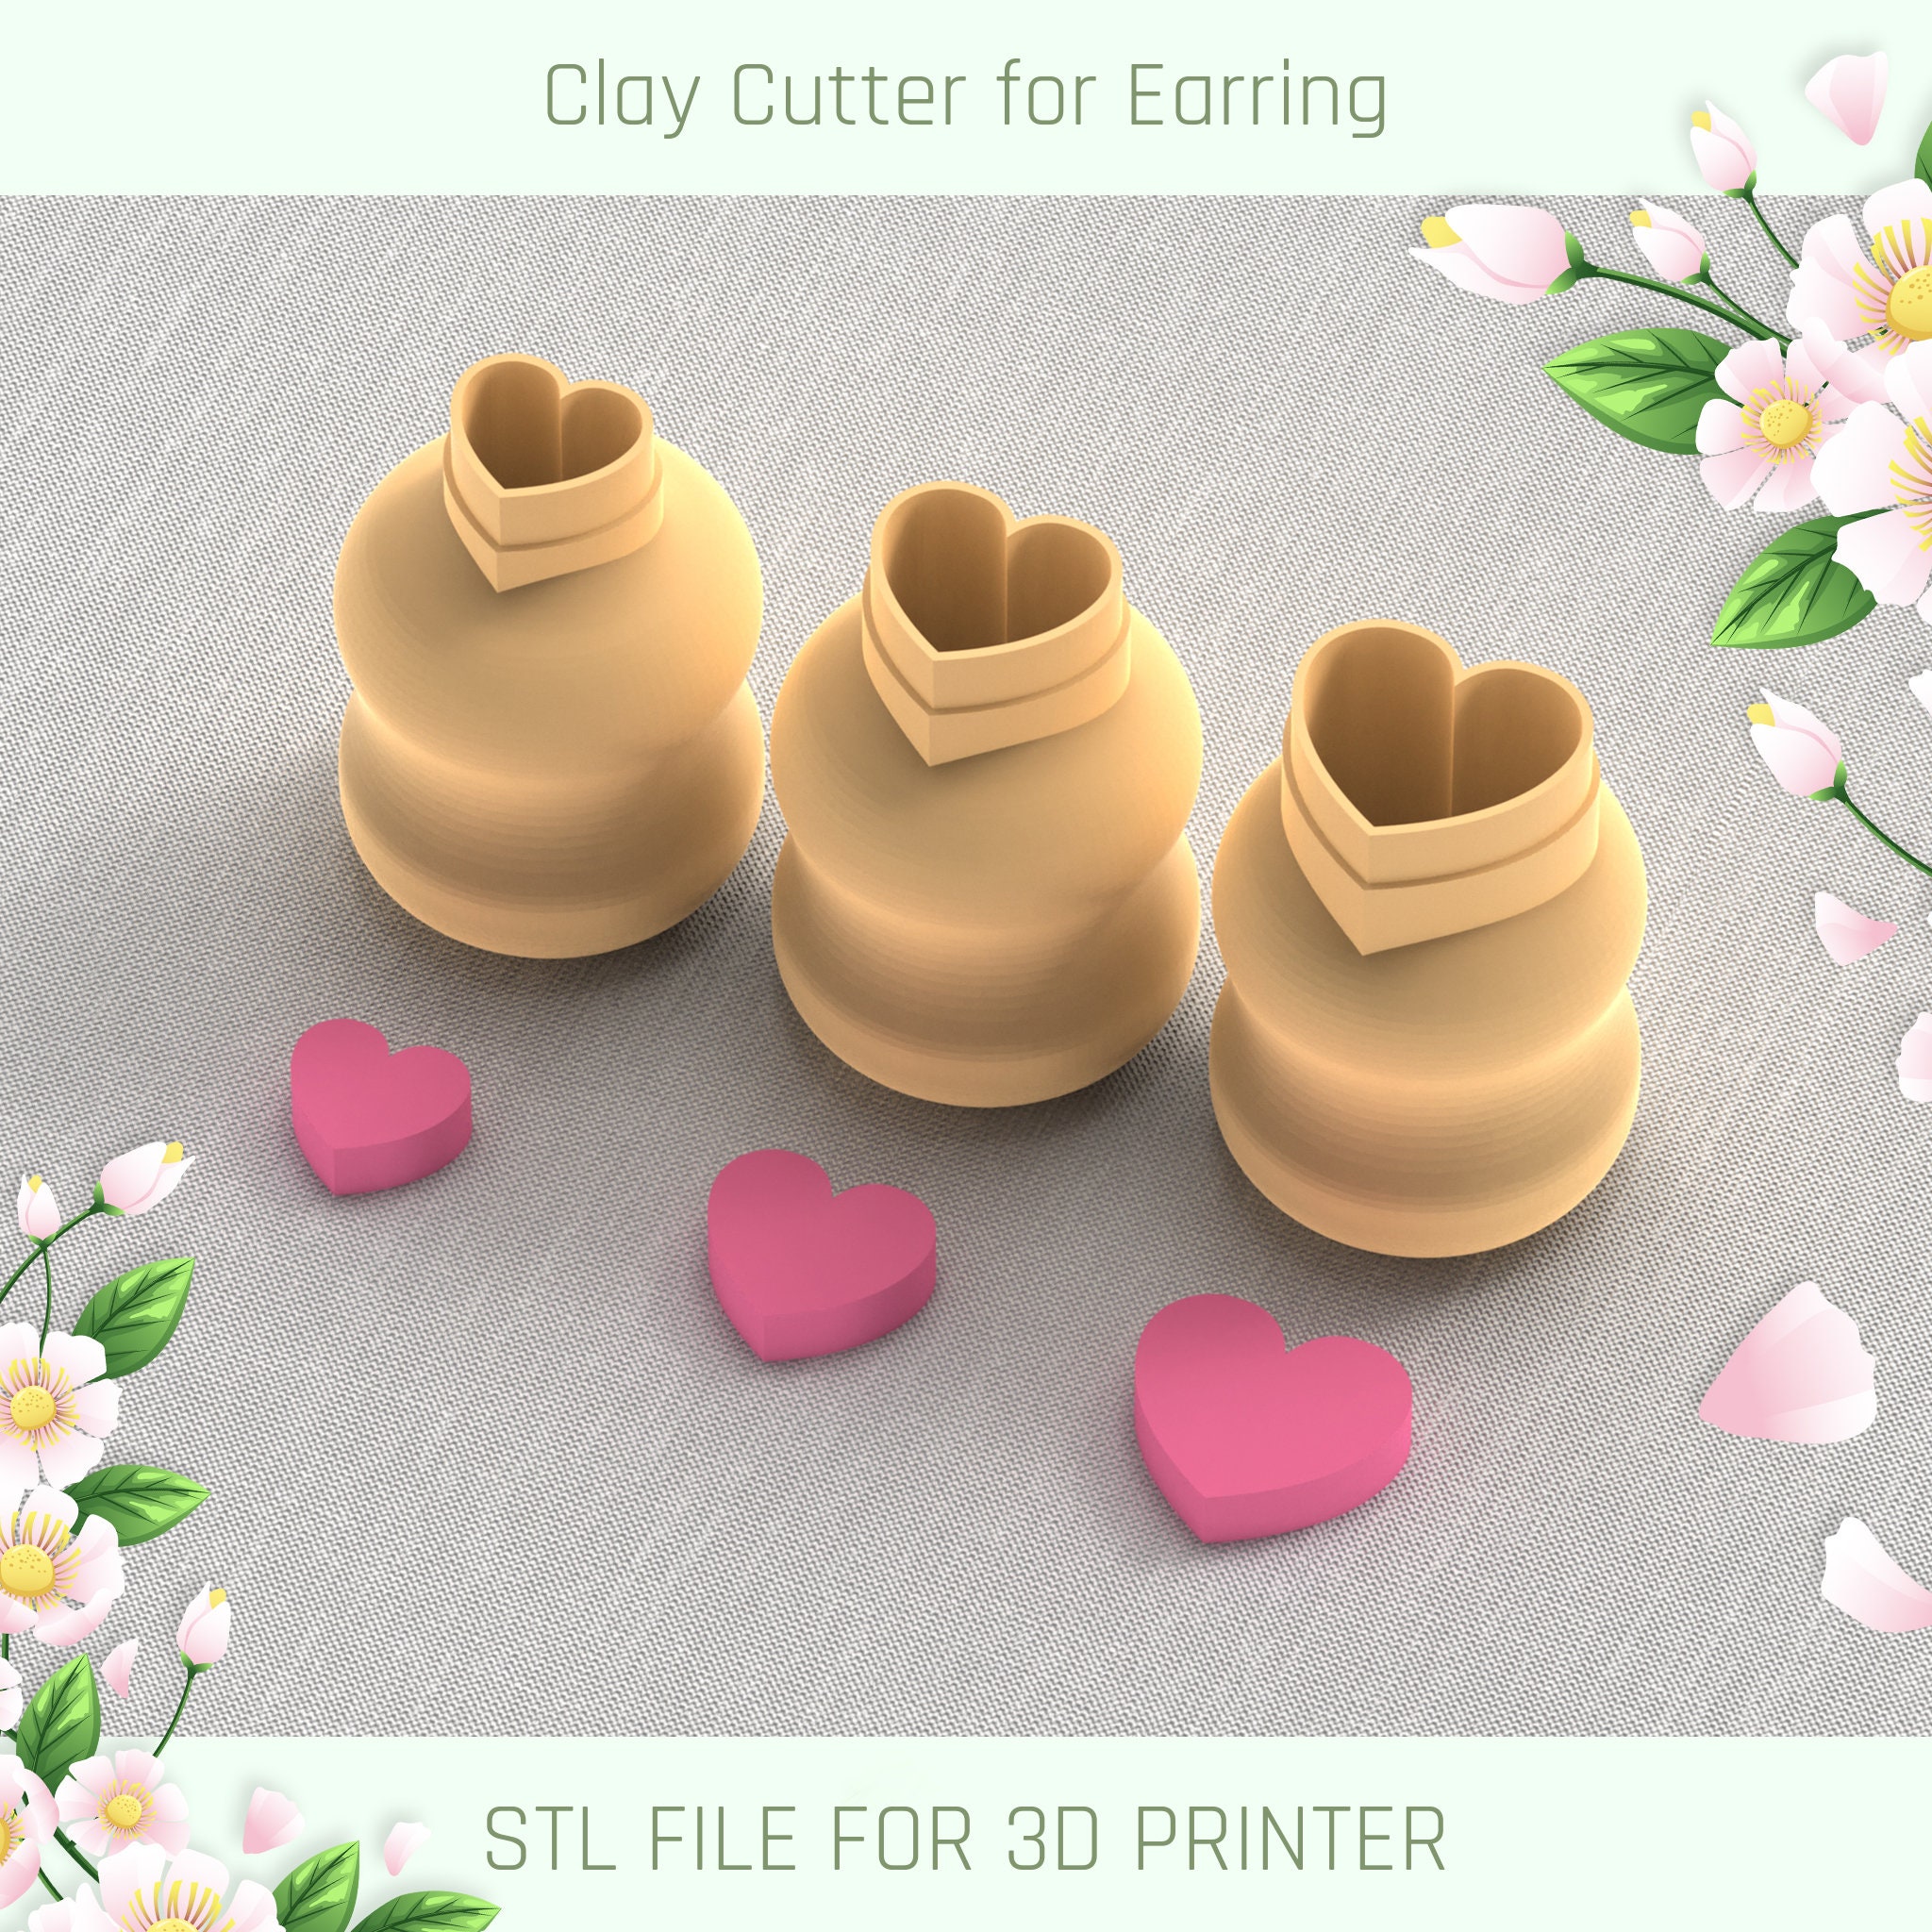 Yofuly Polymer Clay Cutters, 174 Pcs Mini Clay Cutters for Earrings Making,  Polymer Clay Cutter Tools with Flower Polymer Clay Molds and Jewelry